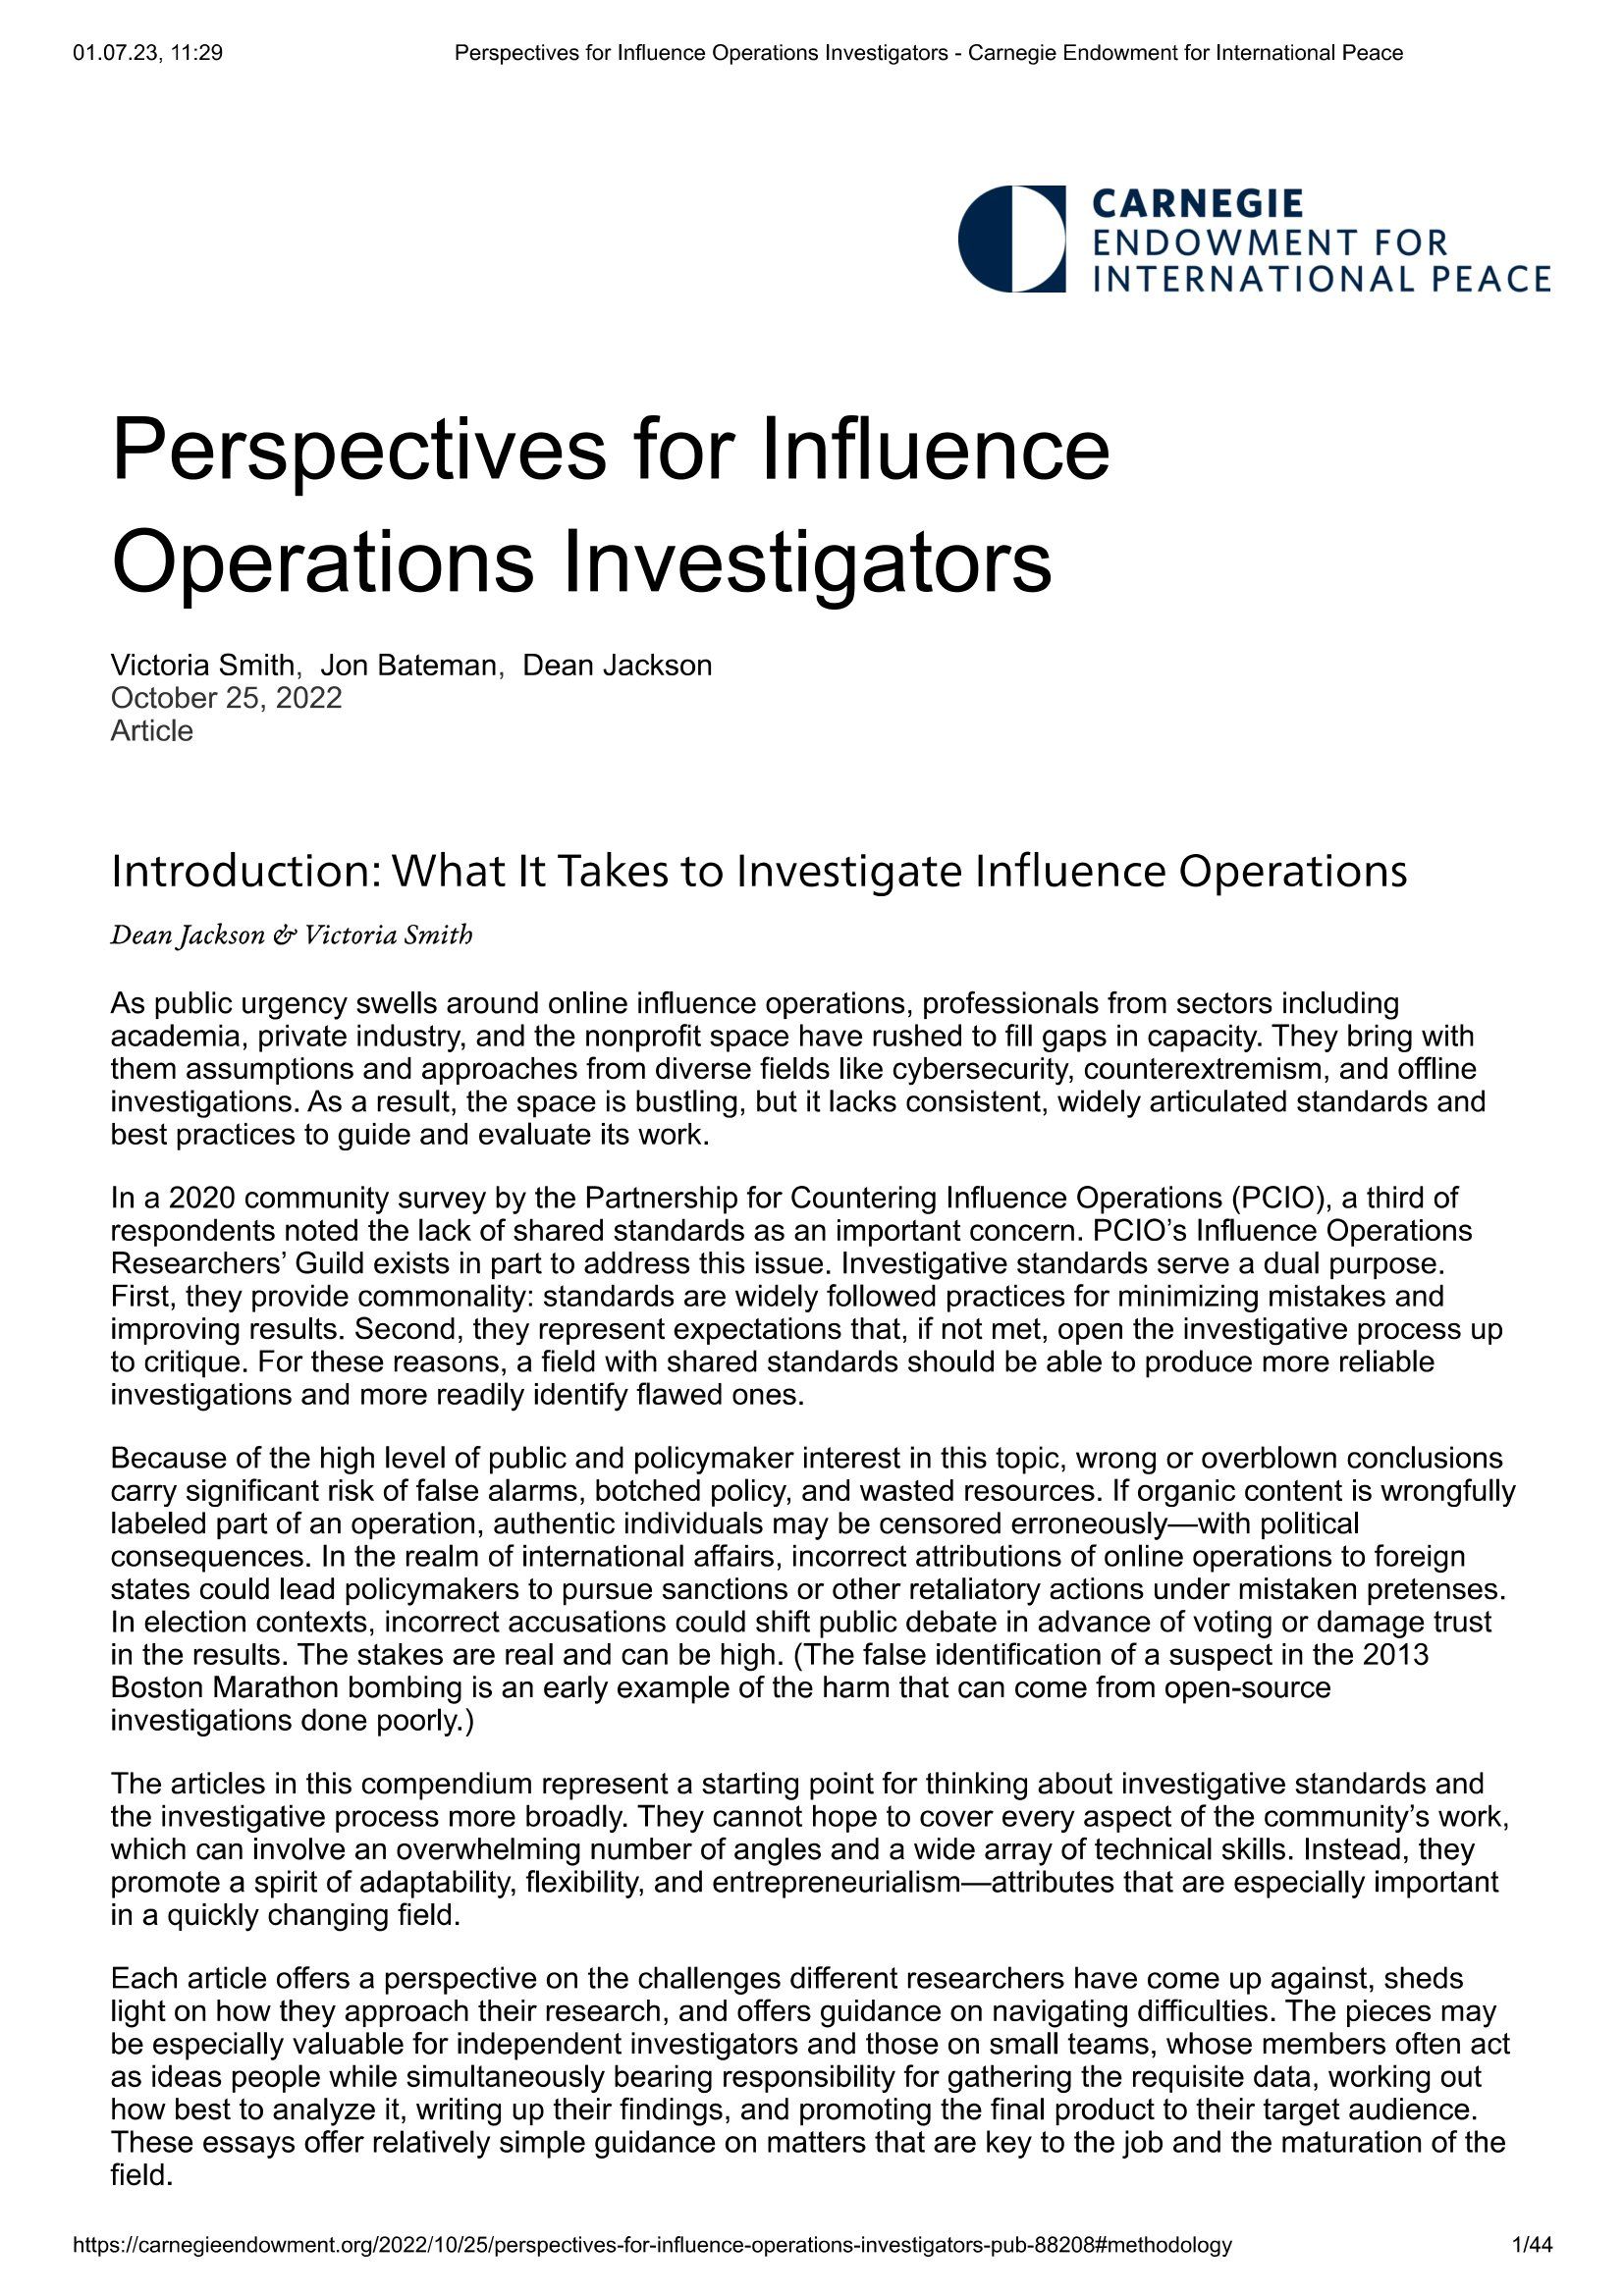 Perspectives for Influence Operations Investigators